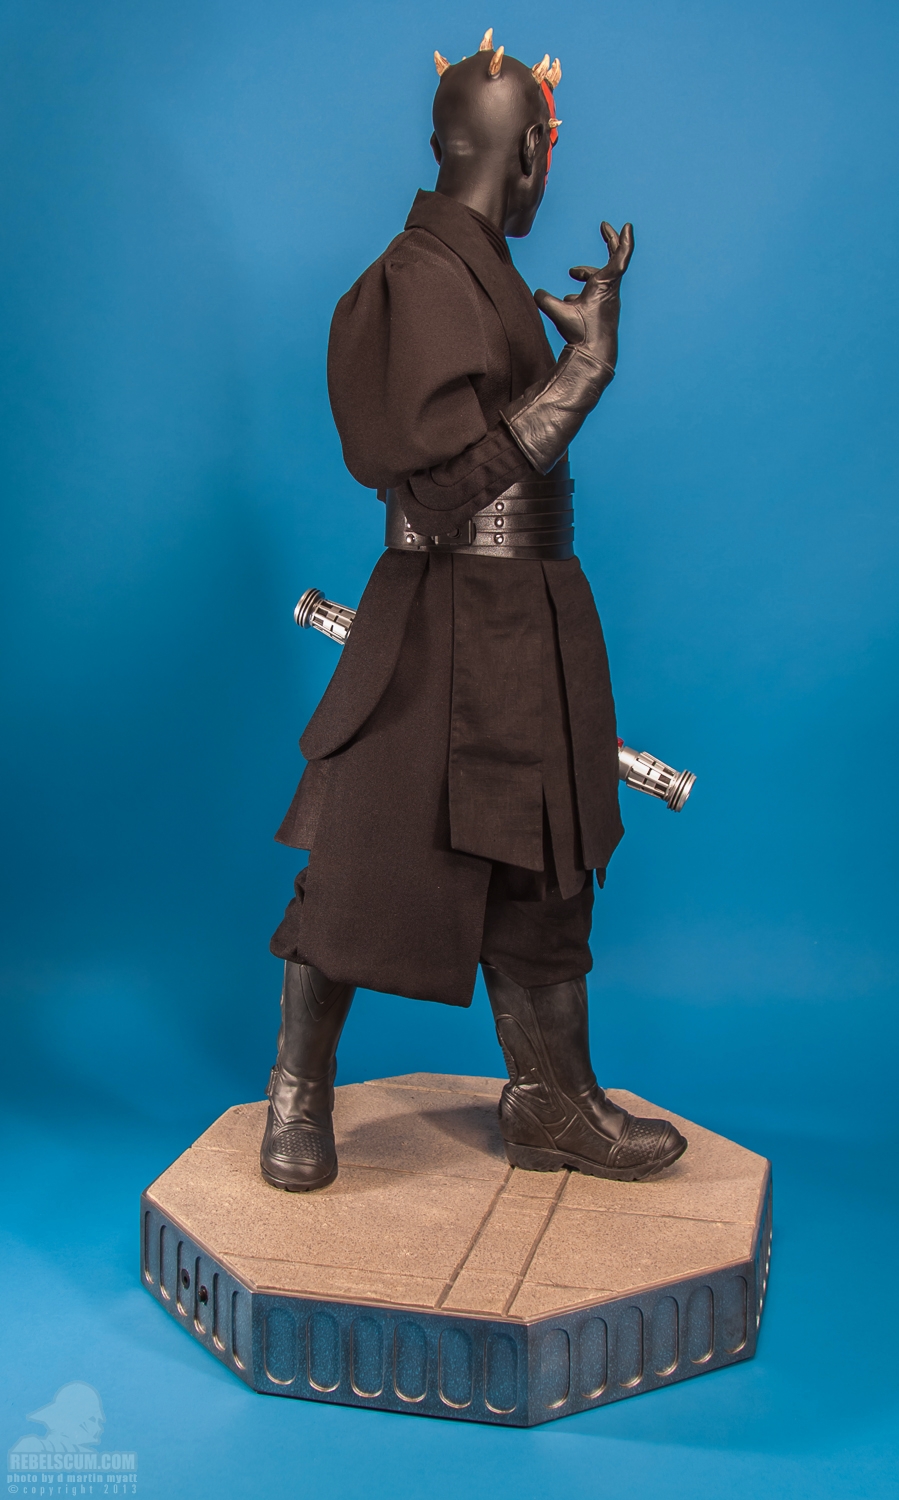 Darth_Maul_Legendary_Scale_Figure_Sideshow_Collectibles-02.jpg